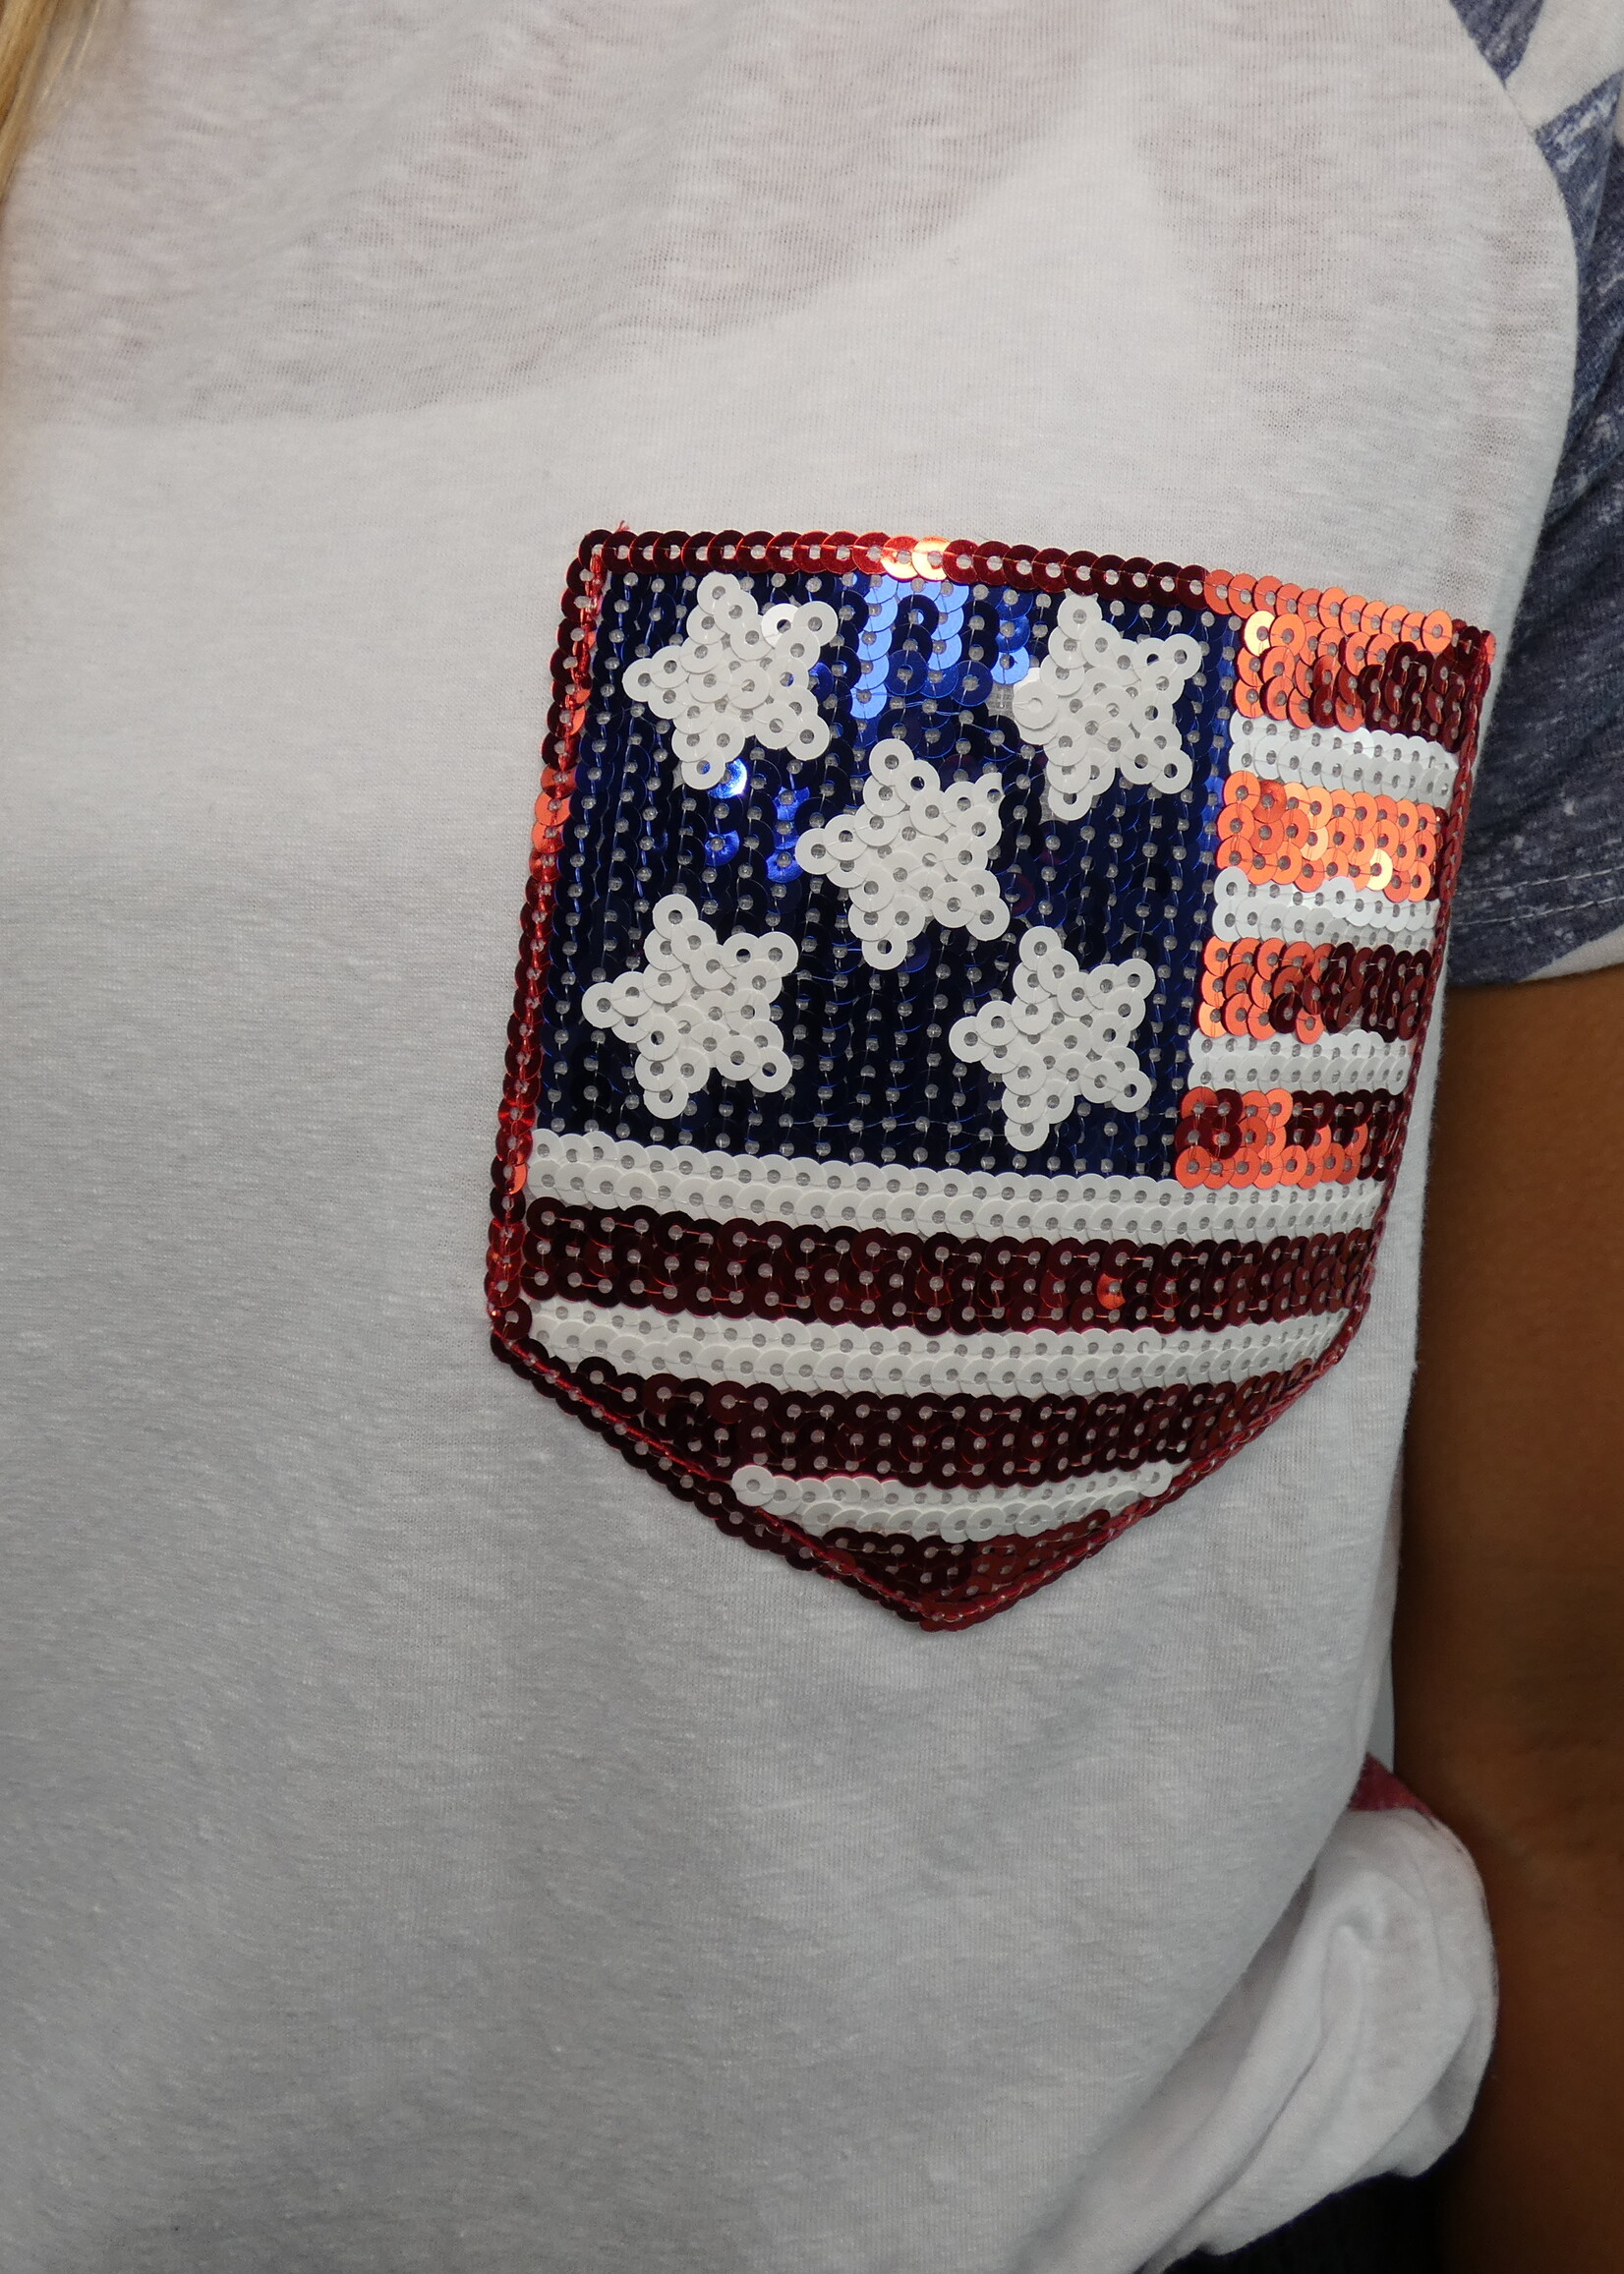 4th of July Top with Sequin Chest Pocket